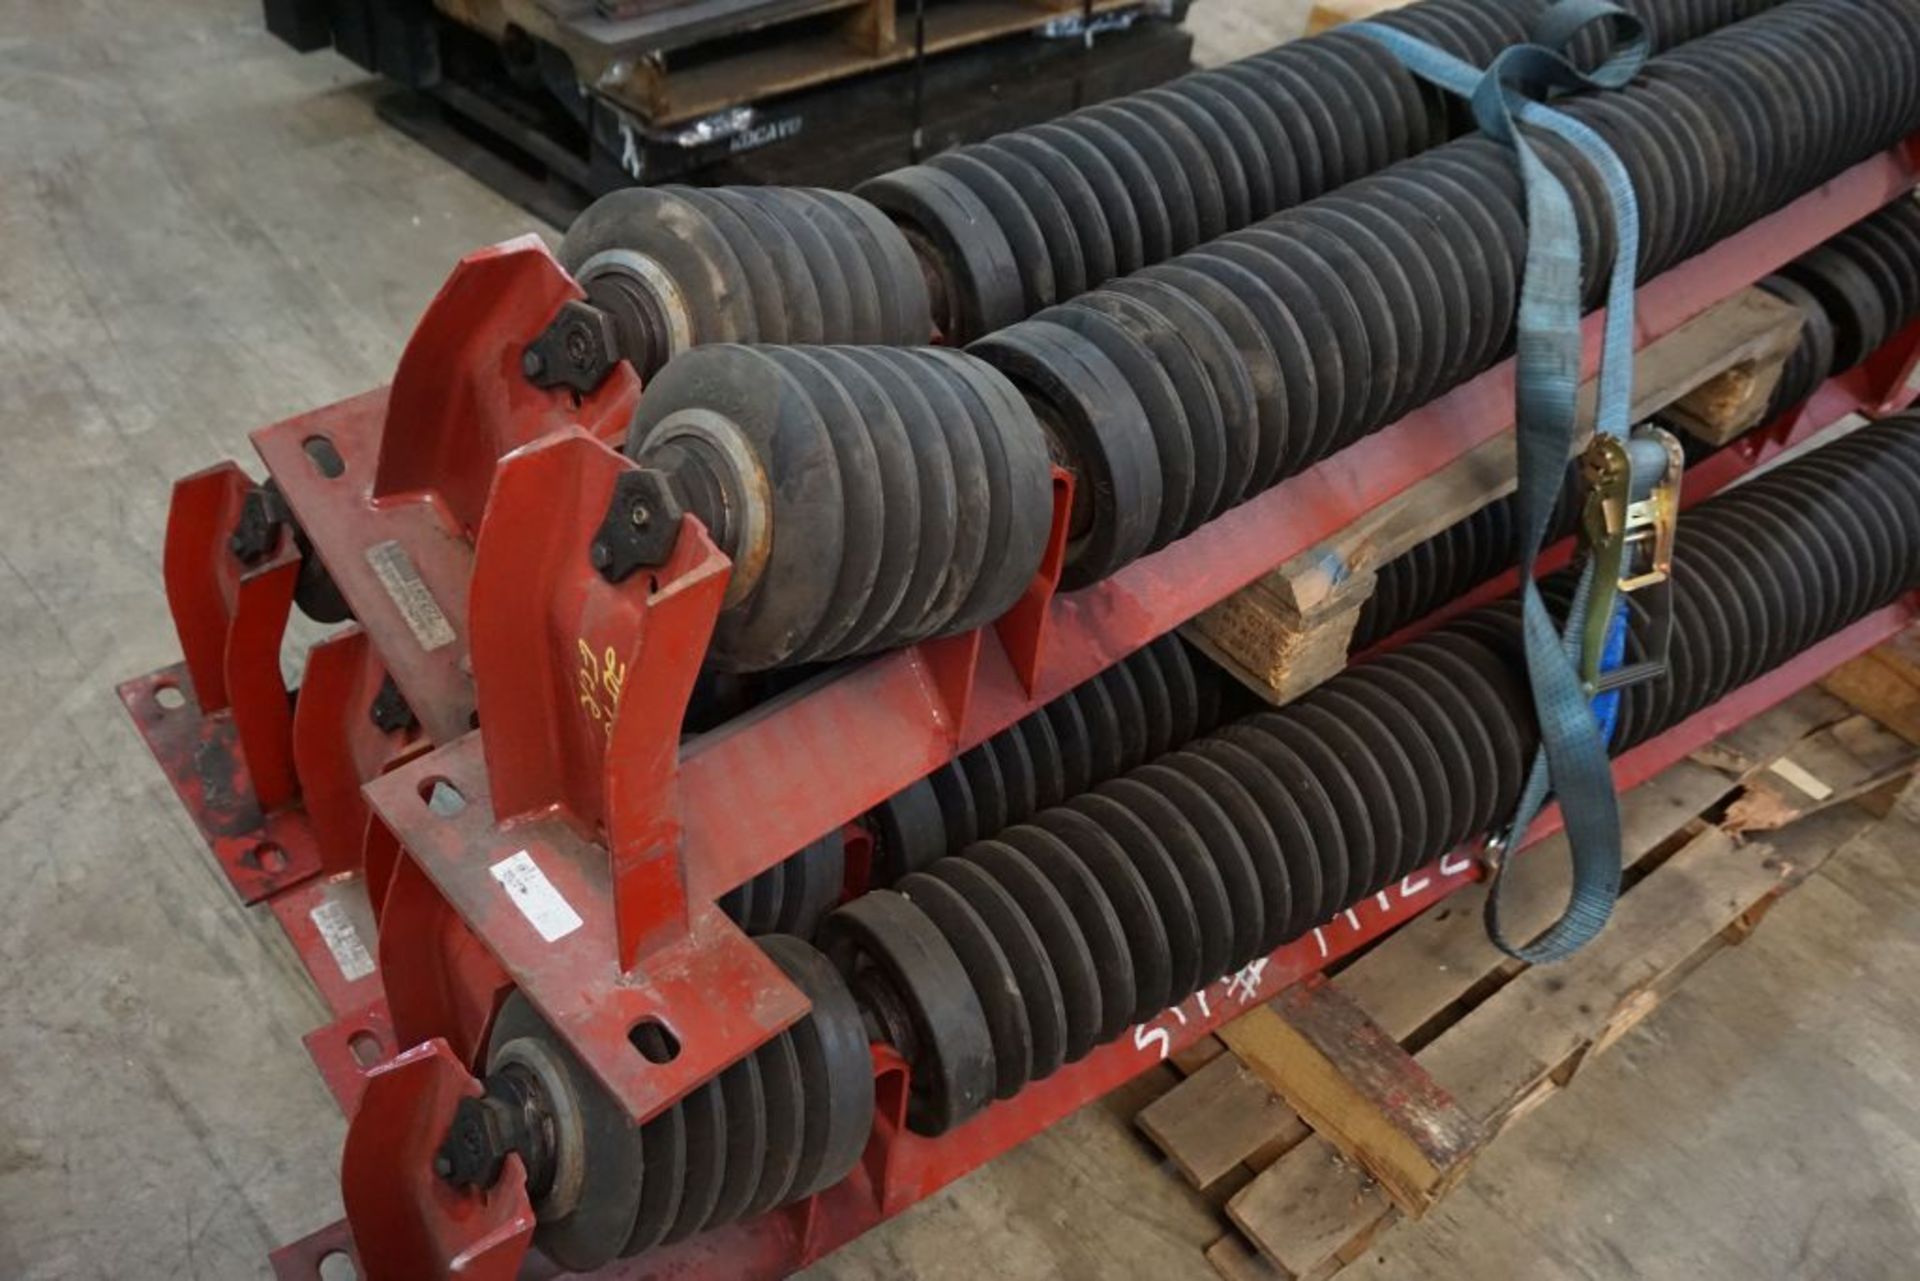 Lot of (6) 6"Diameter Training Idlers|75" Working Width; 90" Overall Width|Lot Loading Fee: $5.00 - Image 4 of 6